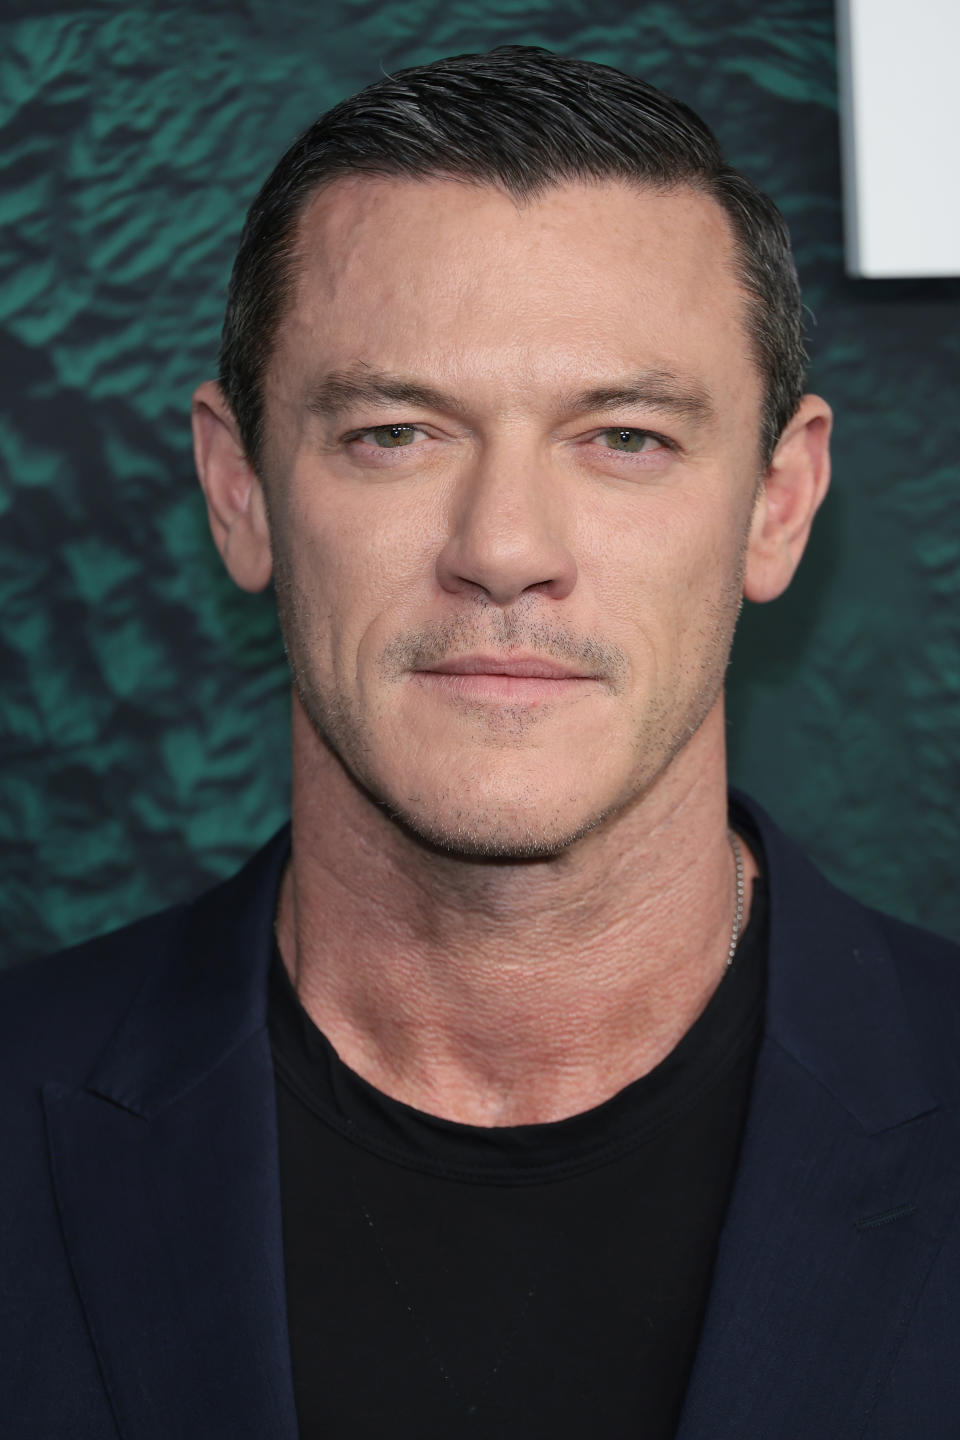 Luke Evans is close to his parents and was delighted to pay off their mortgage for them. (Getty Images)